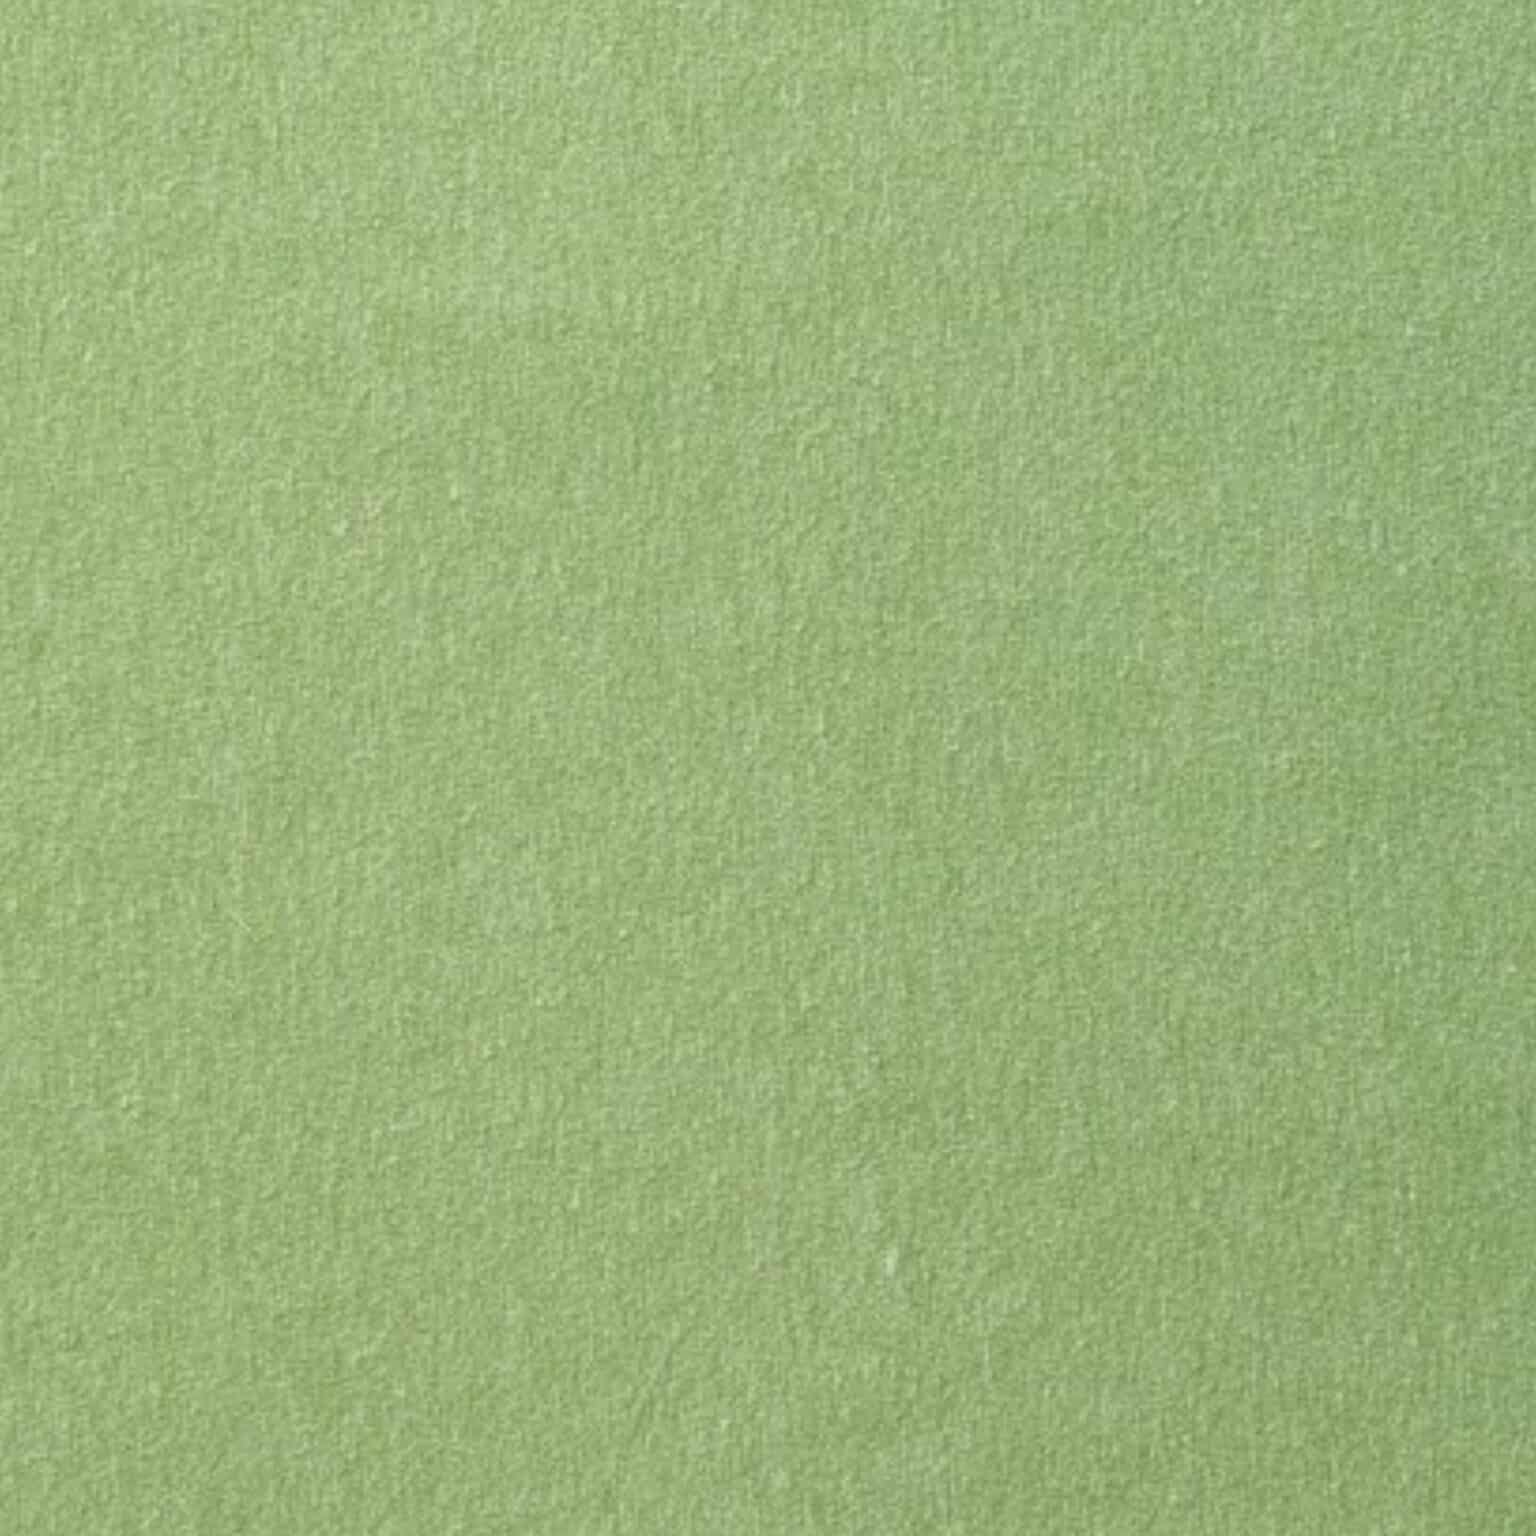 Cotton Jersey Fabric - Lime Green Melange Four Way Stretch - 150cm Wide